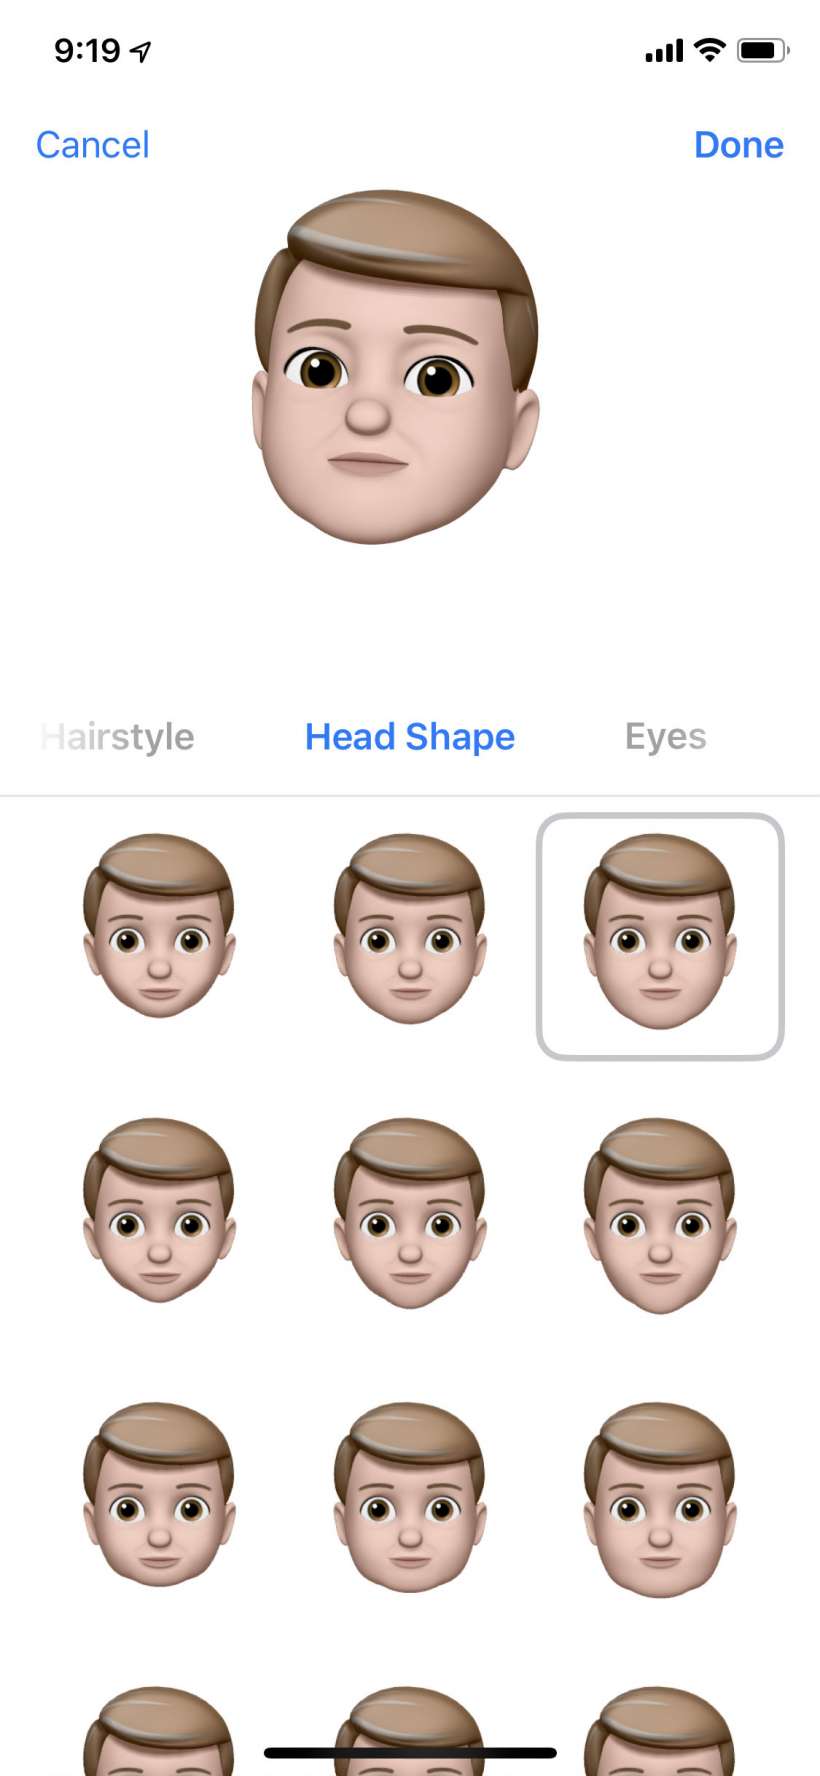 How to create and use Memoji in Messages on iPhone.